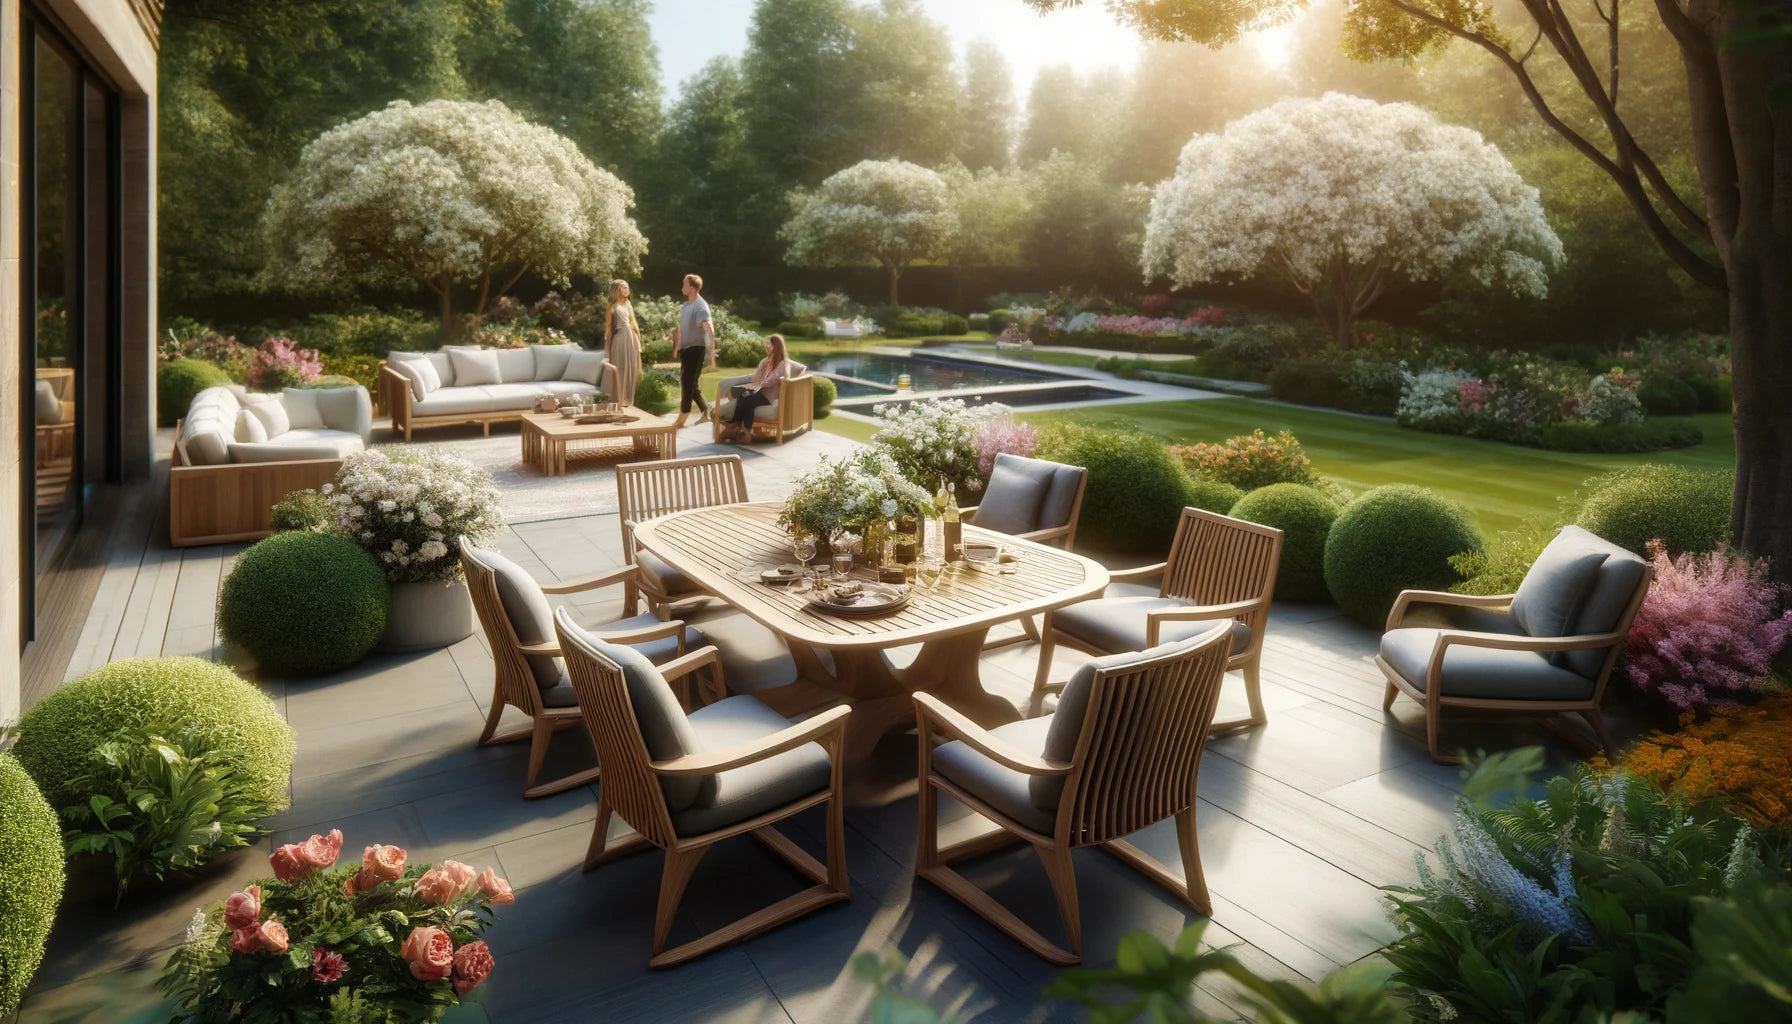 Embracing Summer: The Timeless Charm of Teak Patio Furniture